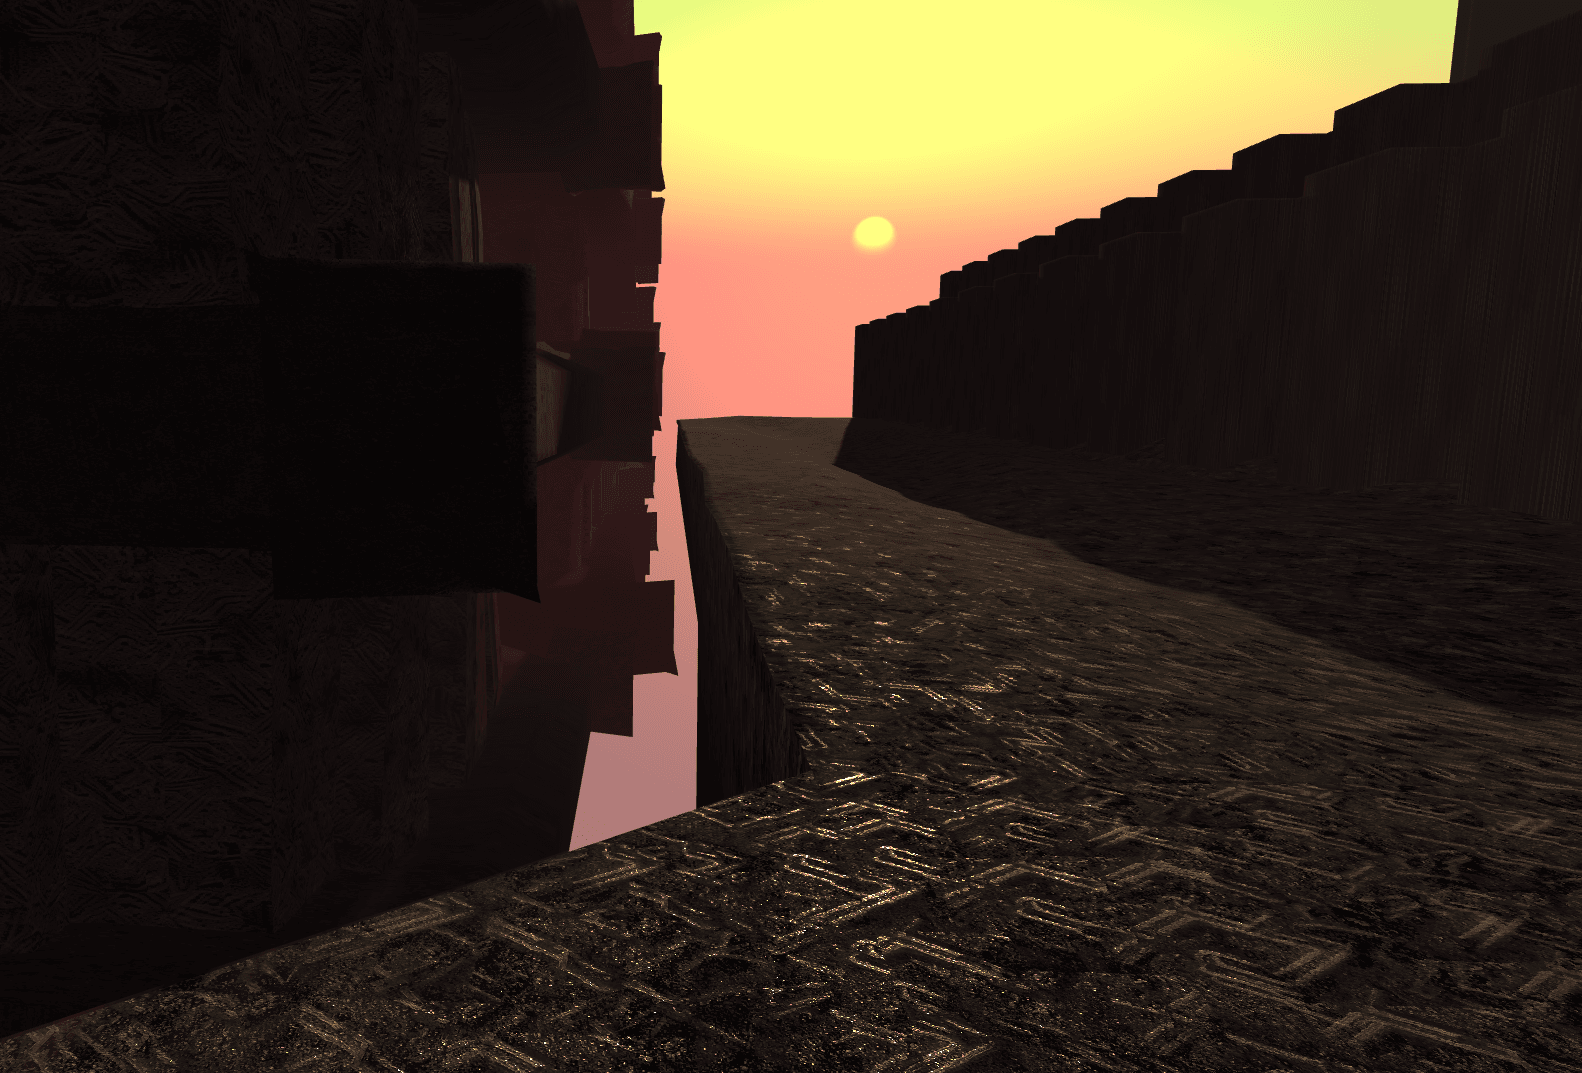 A screenshot of the bridge scene.  It shows a pastel-colored sky in the background with a yellow sun disc.  There are some floating geometric monoliths on the left, and some dark wall-like structures on the right casting prominent shadows.  The ground looks to be rocky with embedded metal that reflects golden in the light.